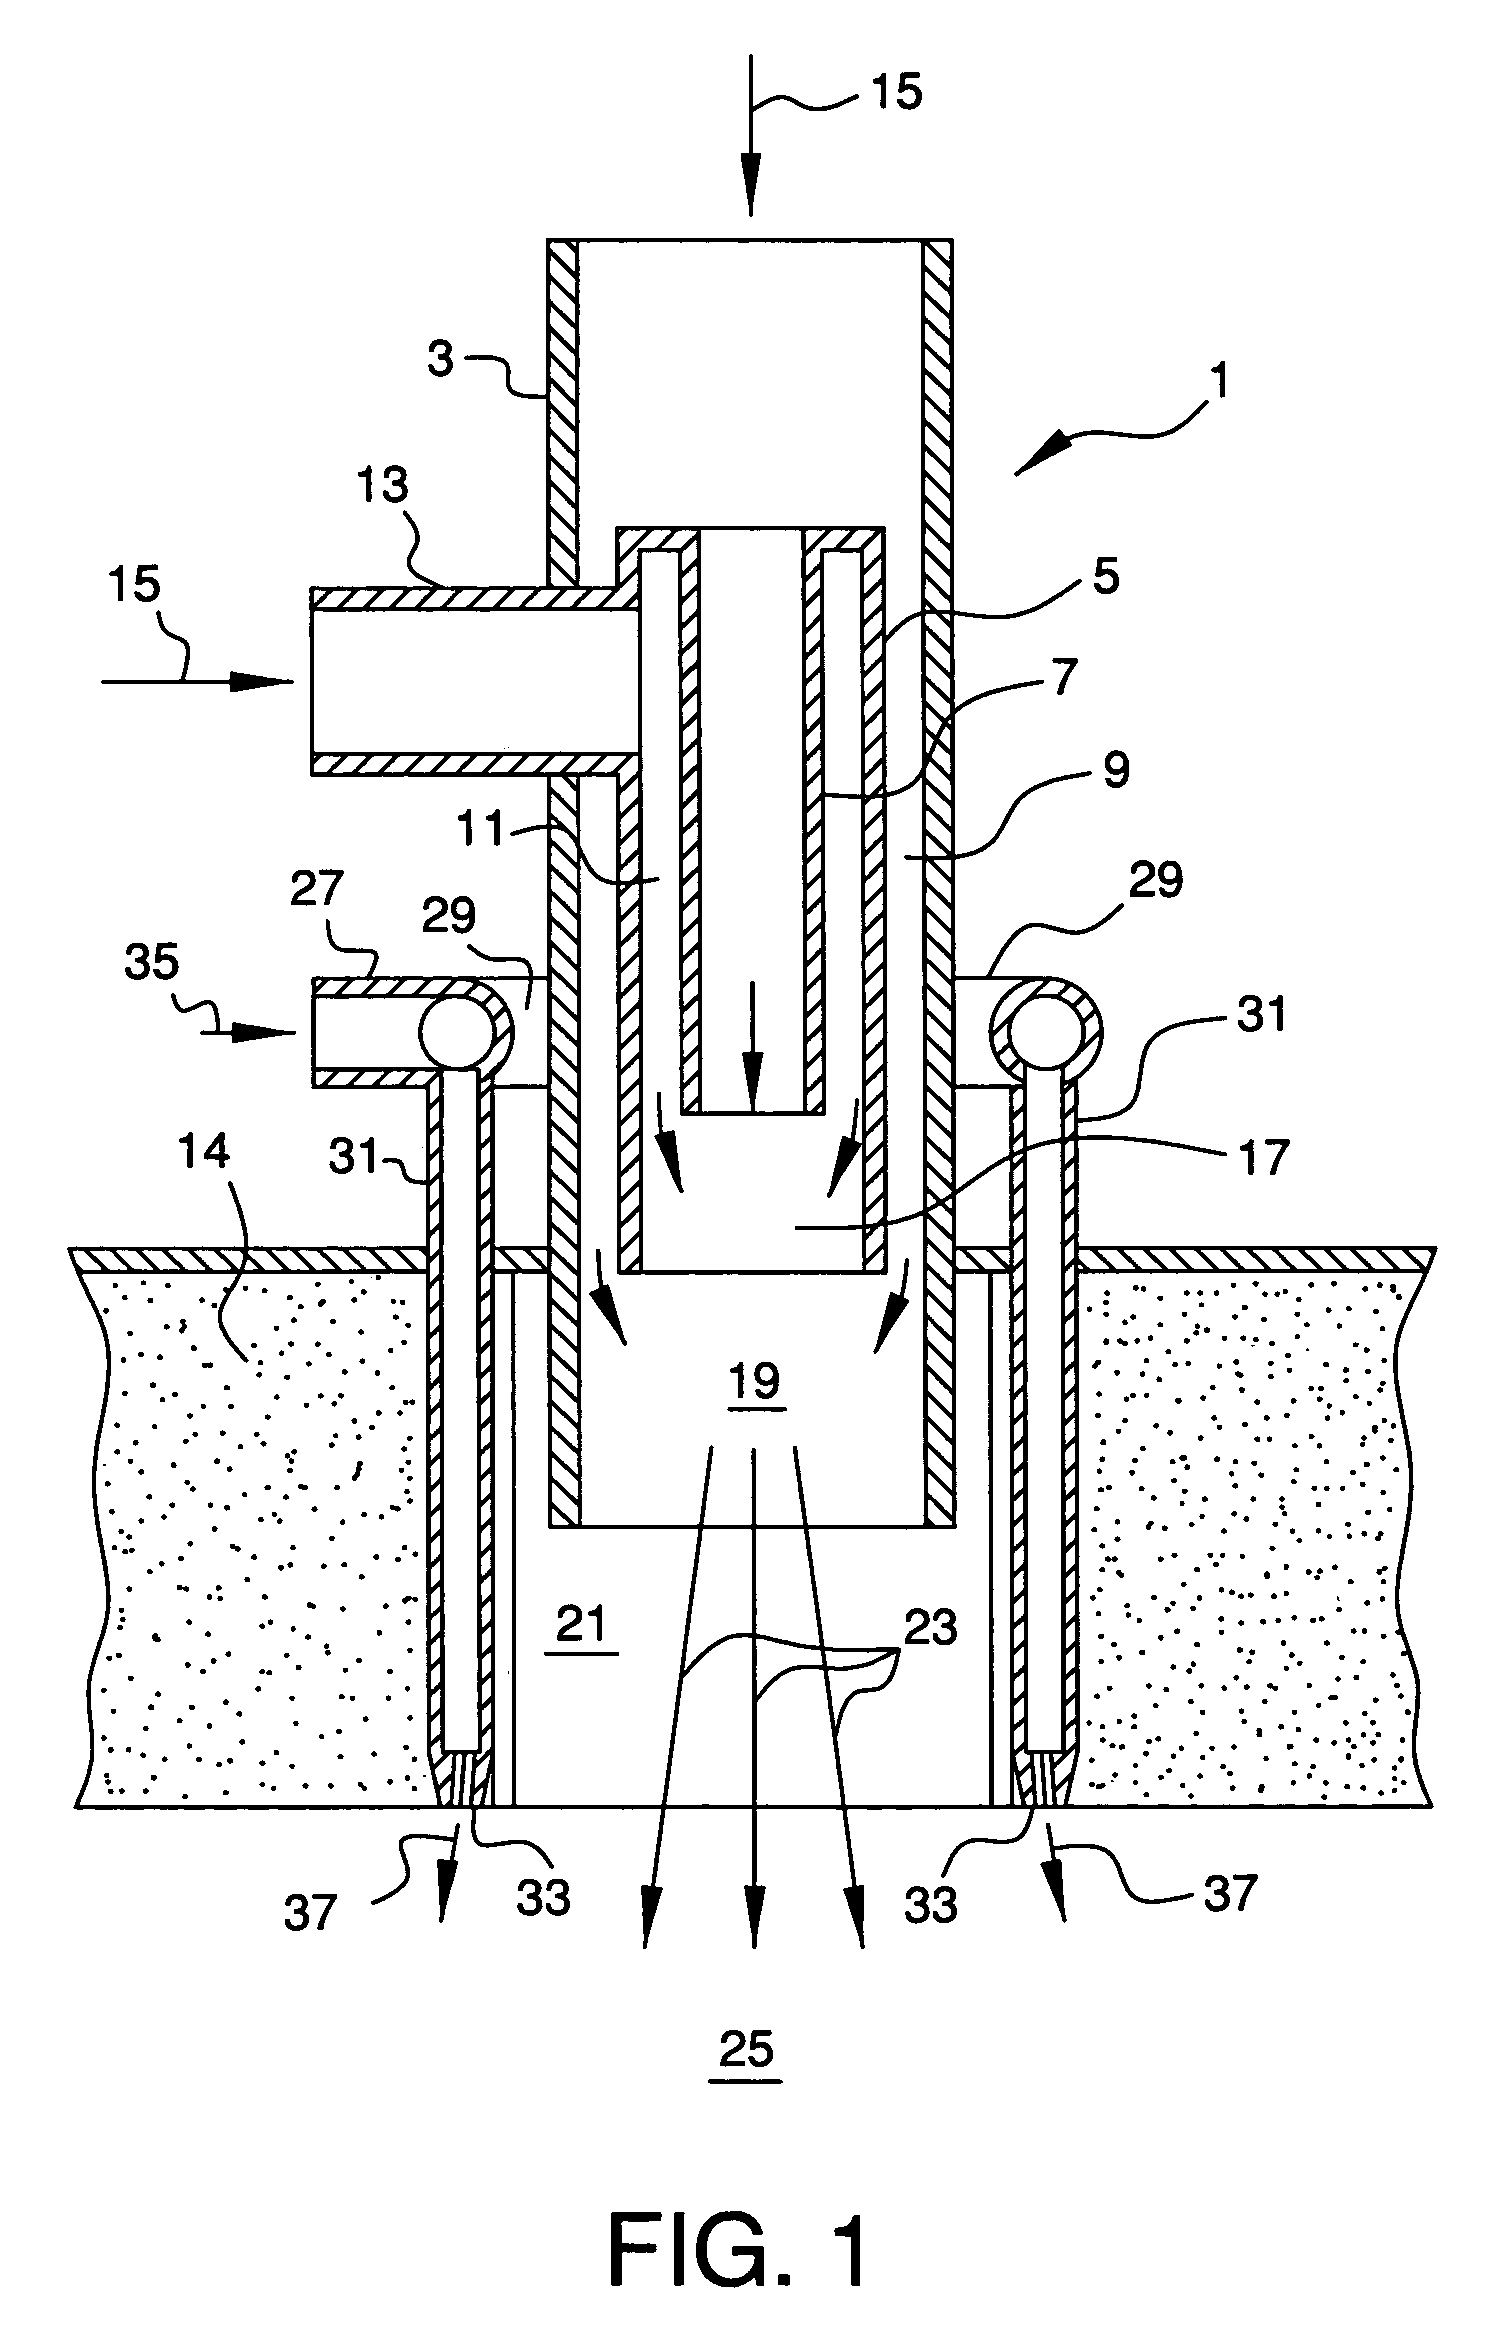 Staged combustion system with ignition-assisted fuel lances